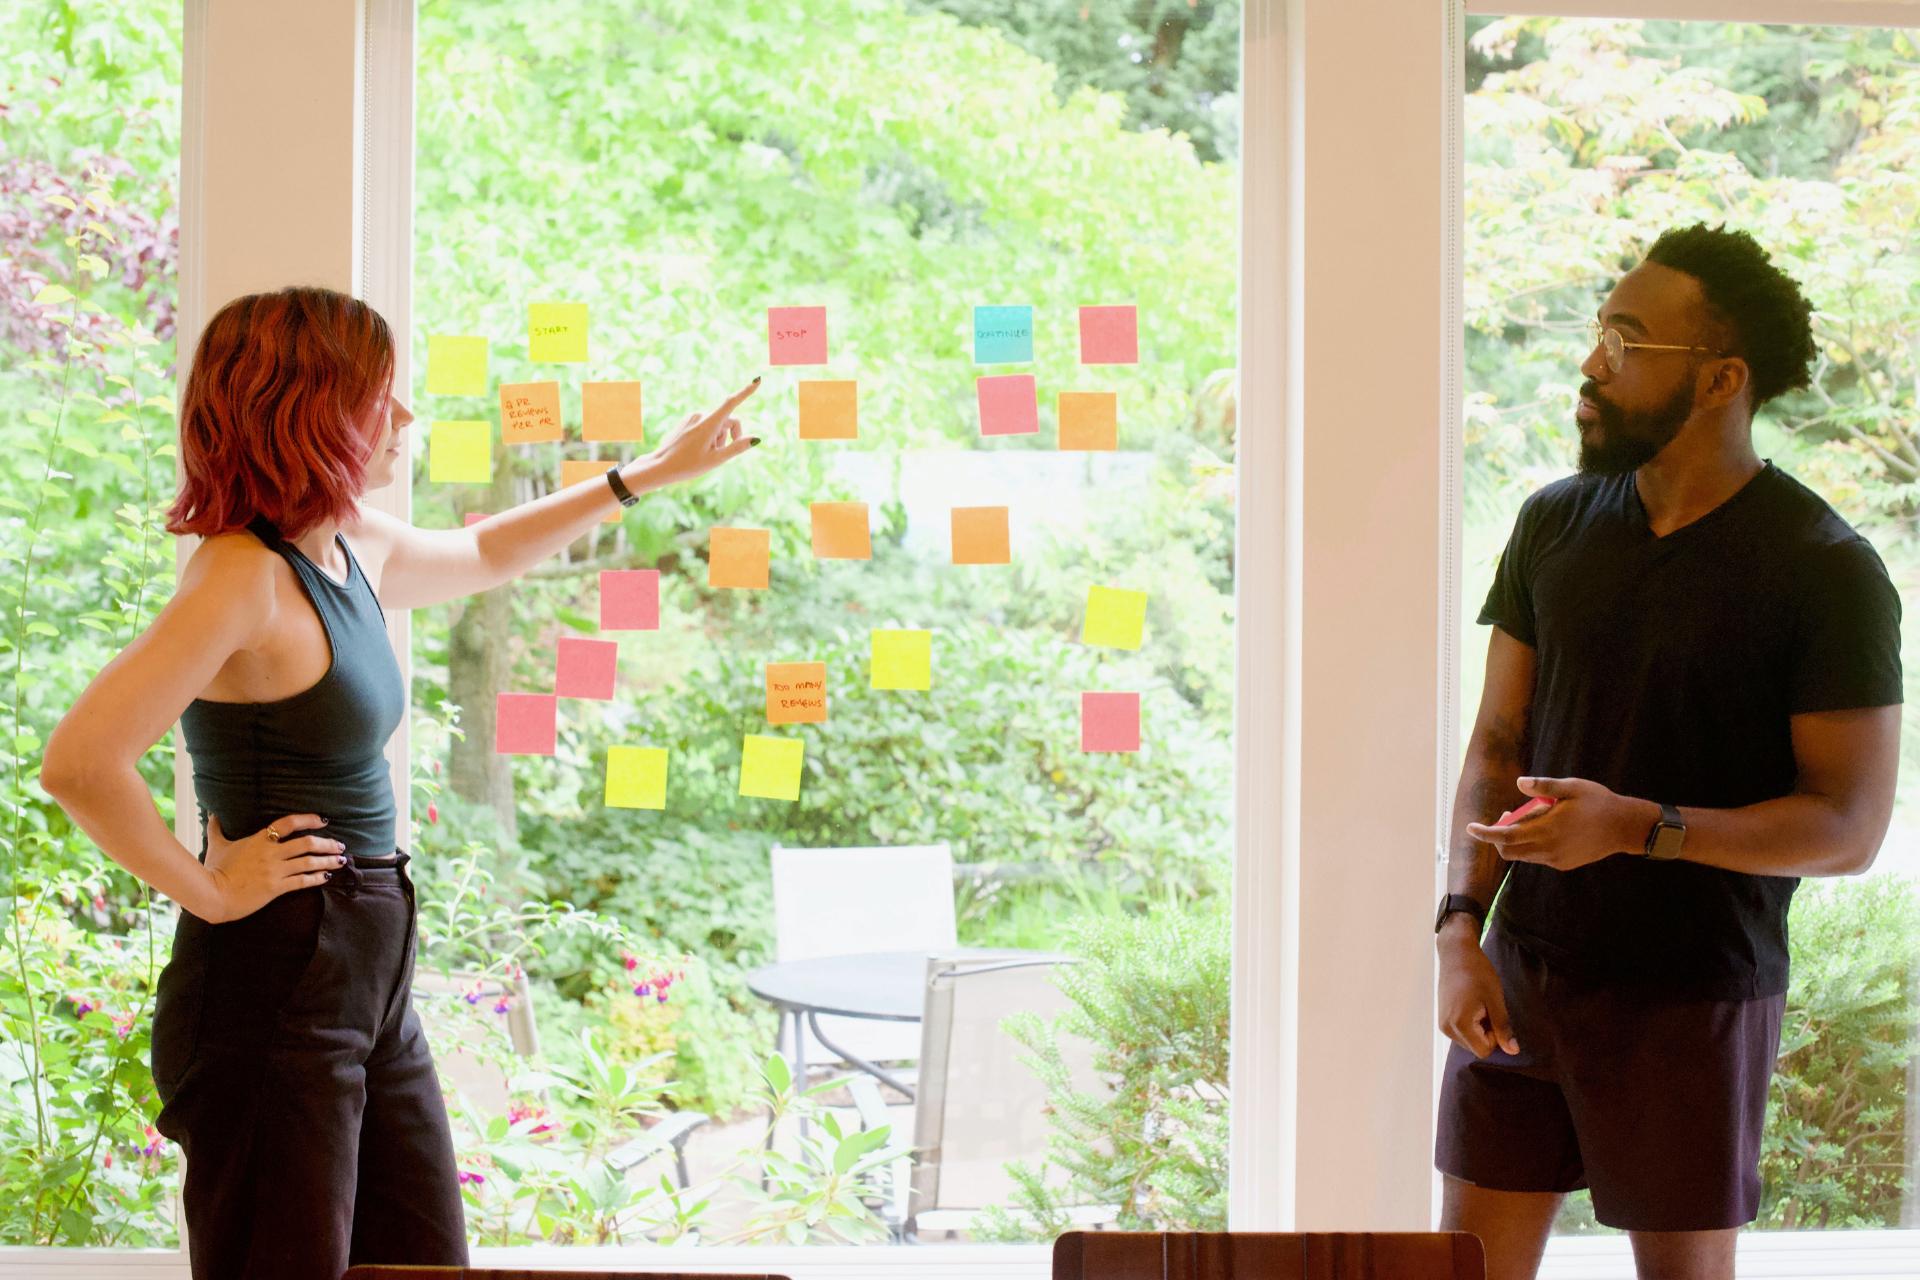 Woman and man brainstorming slogan ideas with post it notes on glass